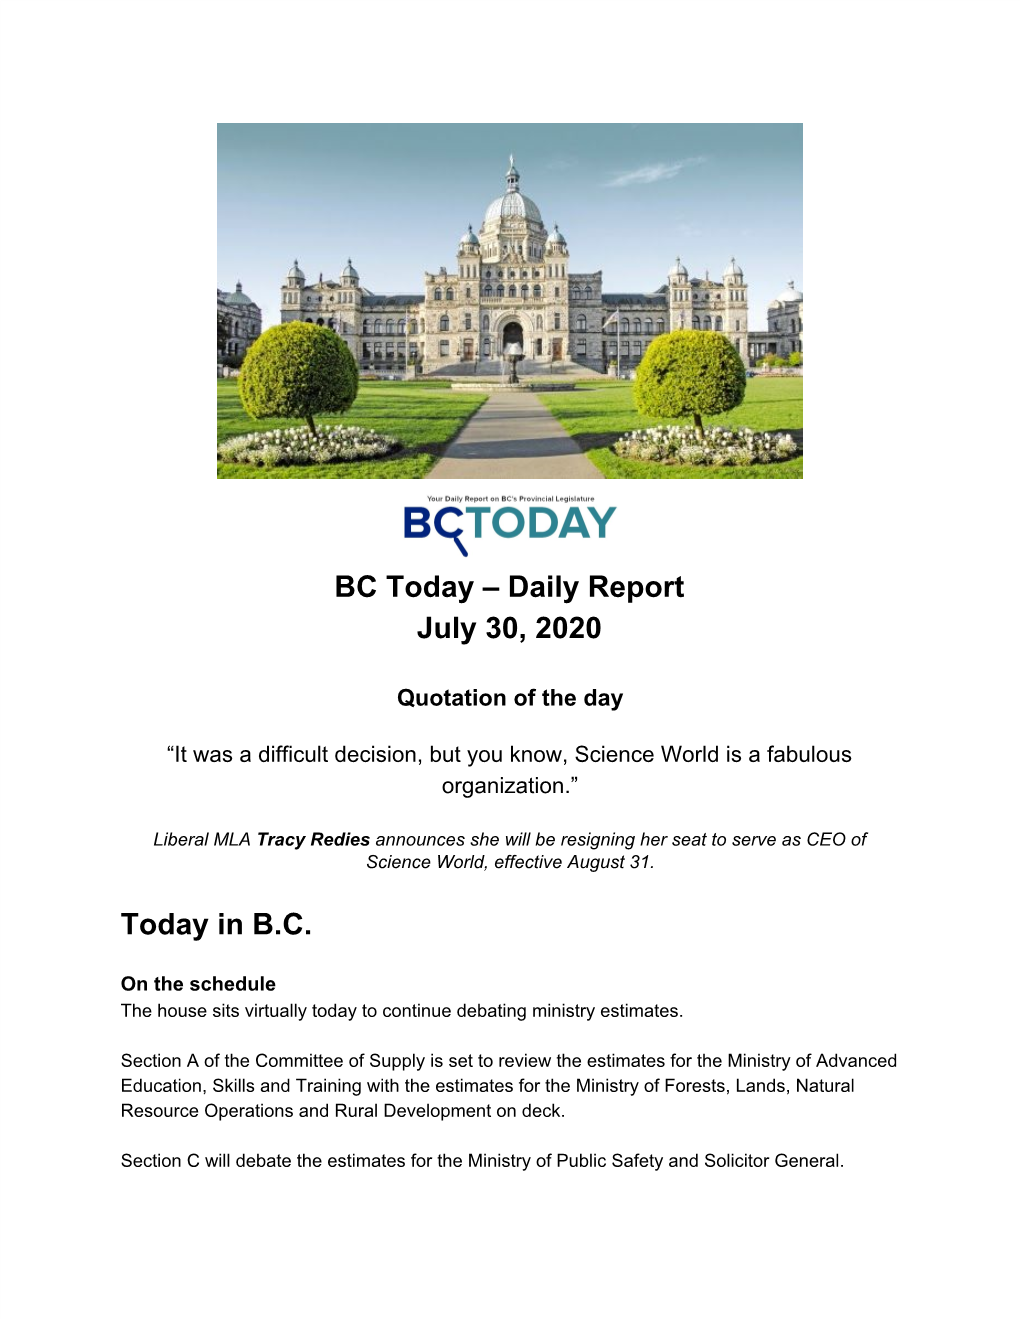 BC Today – Daily Report July 30, 2020 Today in BC